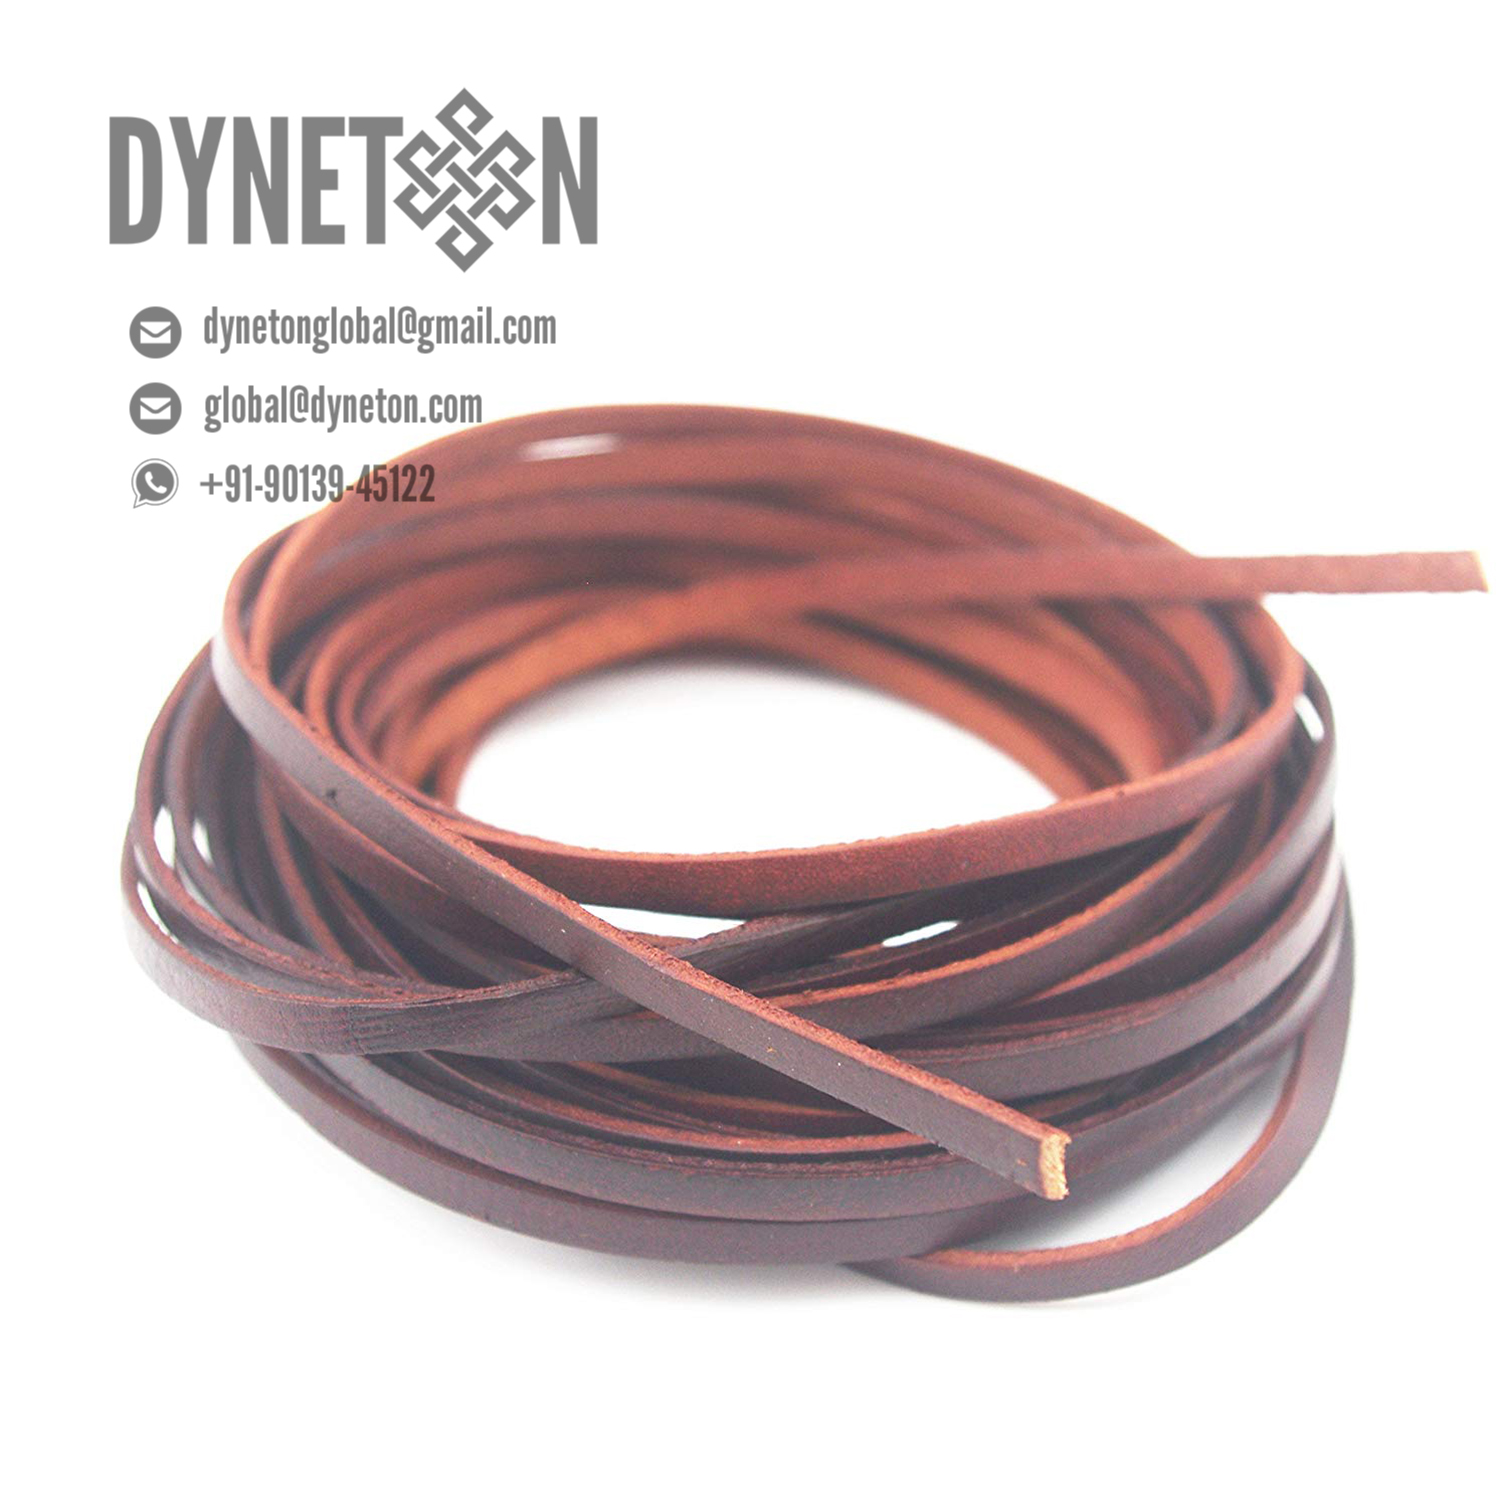 2mm Flat Leather Cord - DYNETON / Flat Leather Cords 2 mm